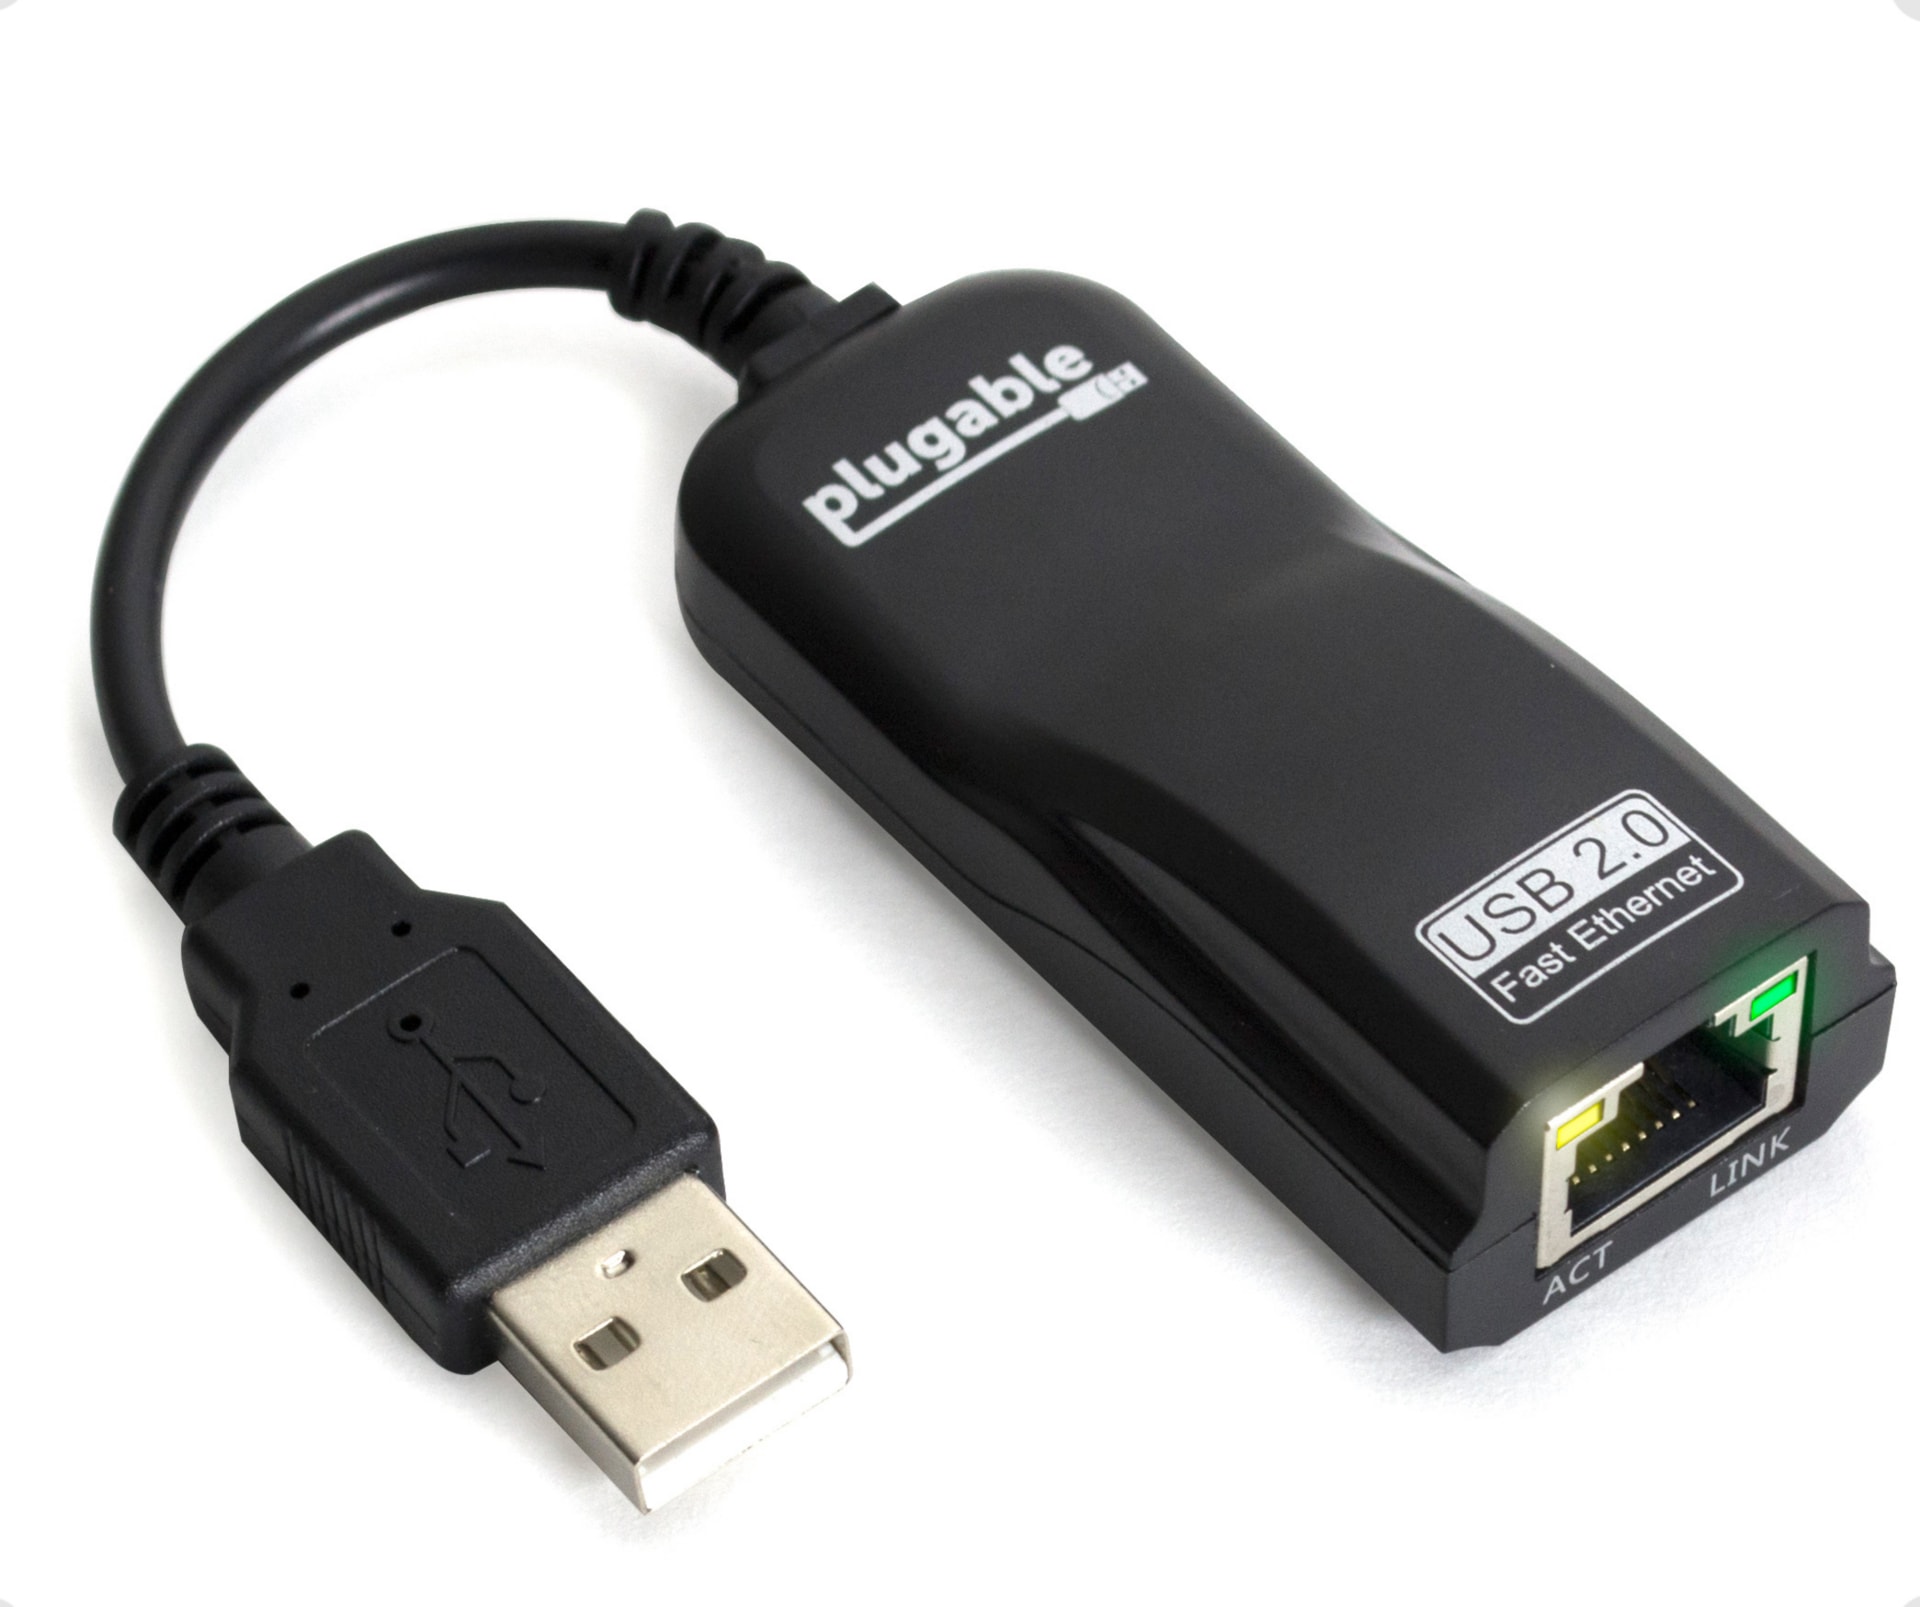 Plugable Network Adapter - USB 2.0 to 10/100 Ethernet, Driverless